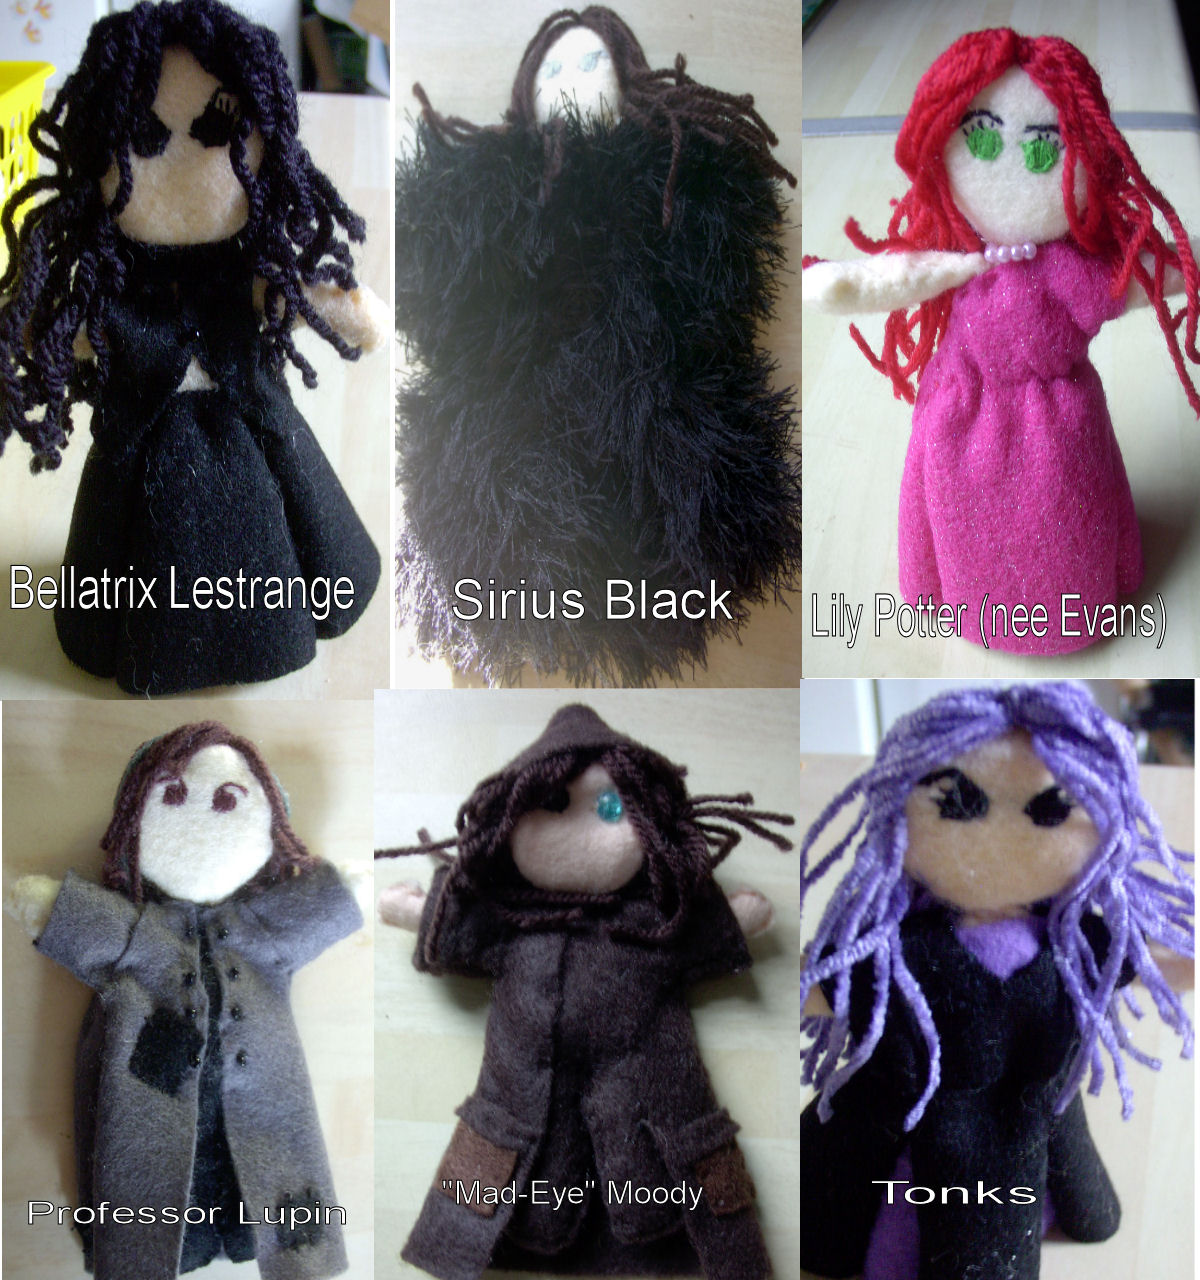 Harry Potter-style dolls by sdys15453